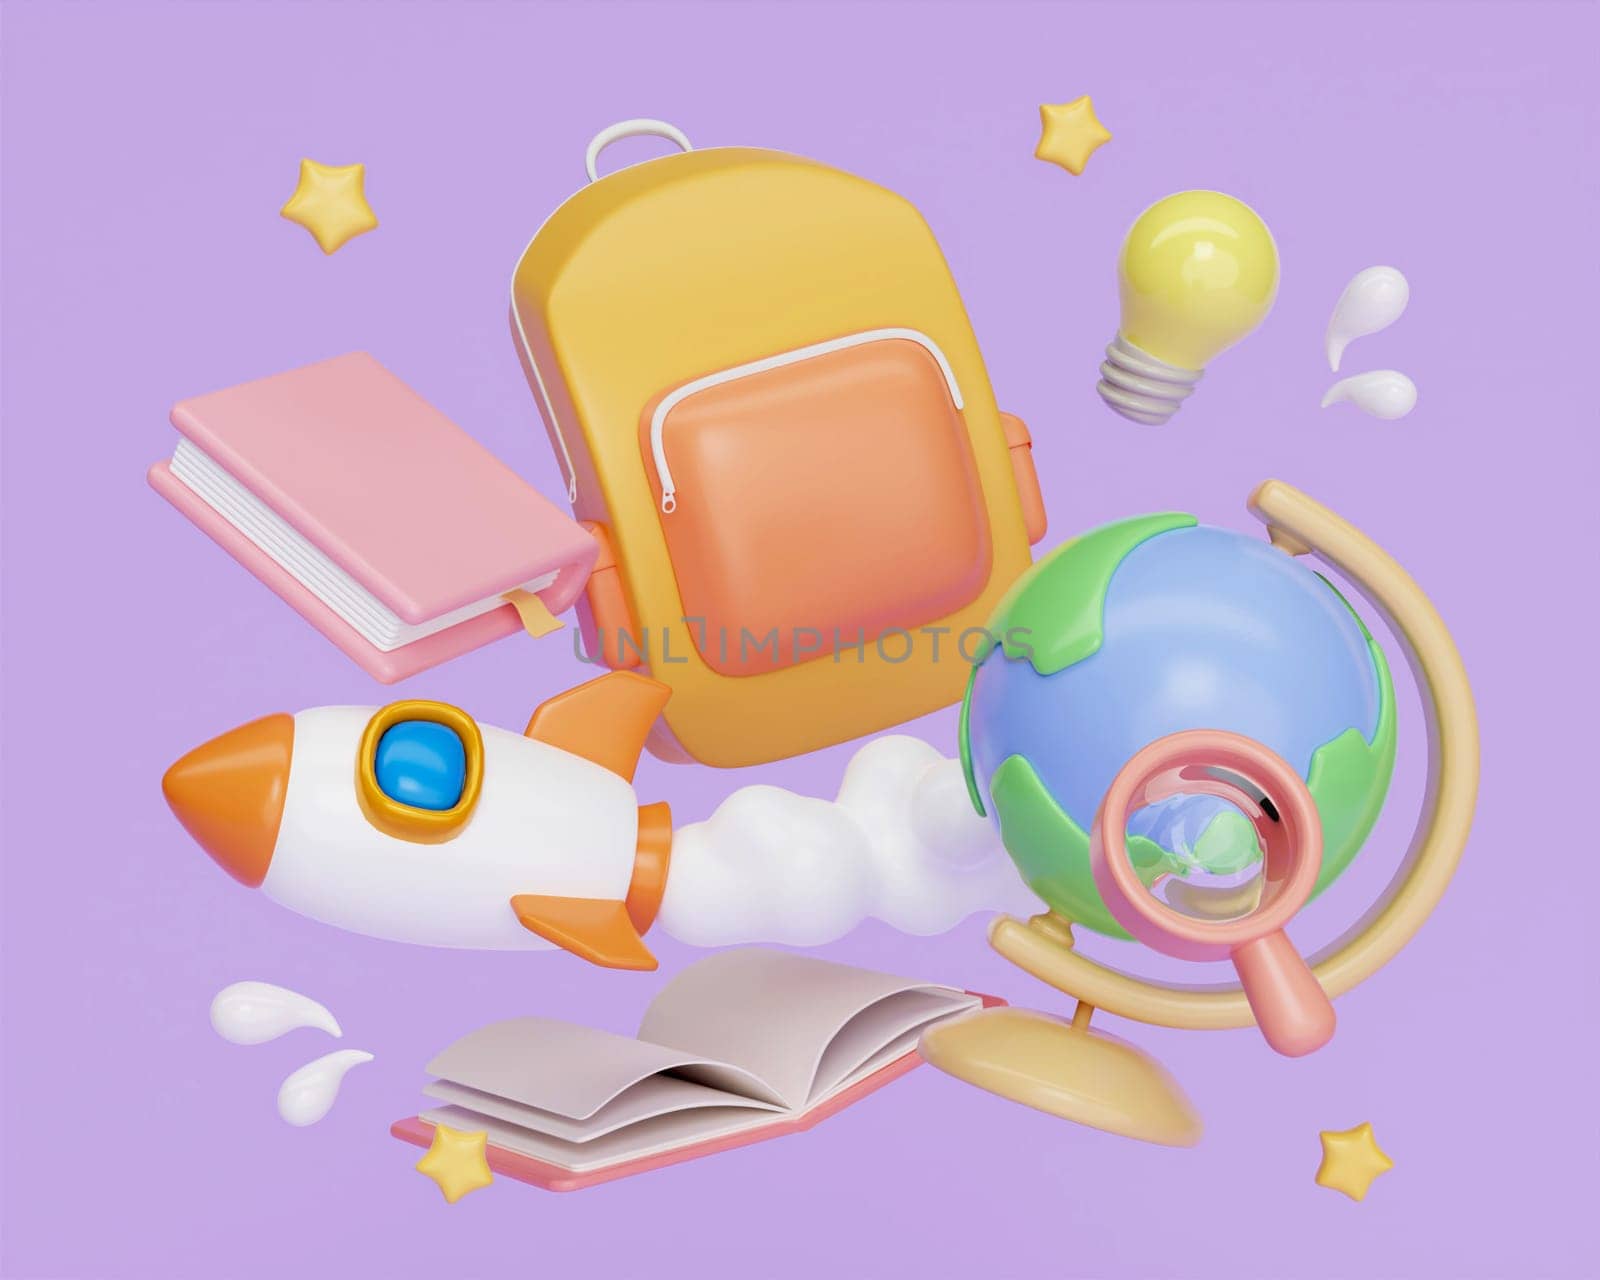 3d education concept. school accessories on purple background. back to school. 3d rendering illustration. by meepiangraphic